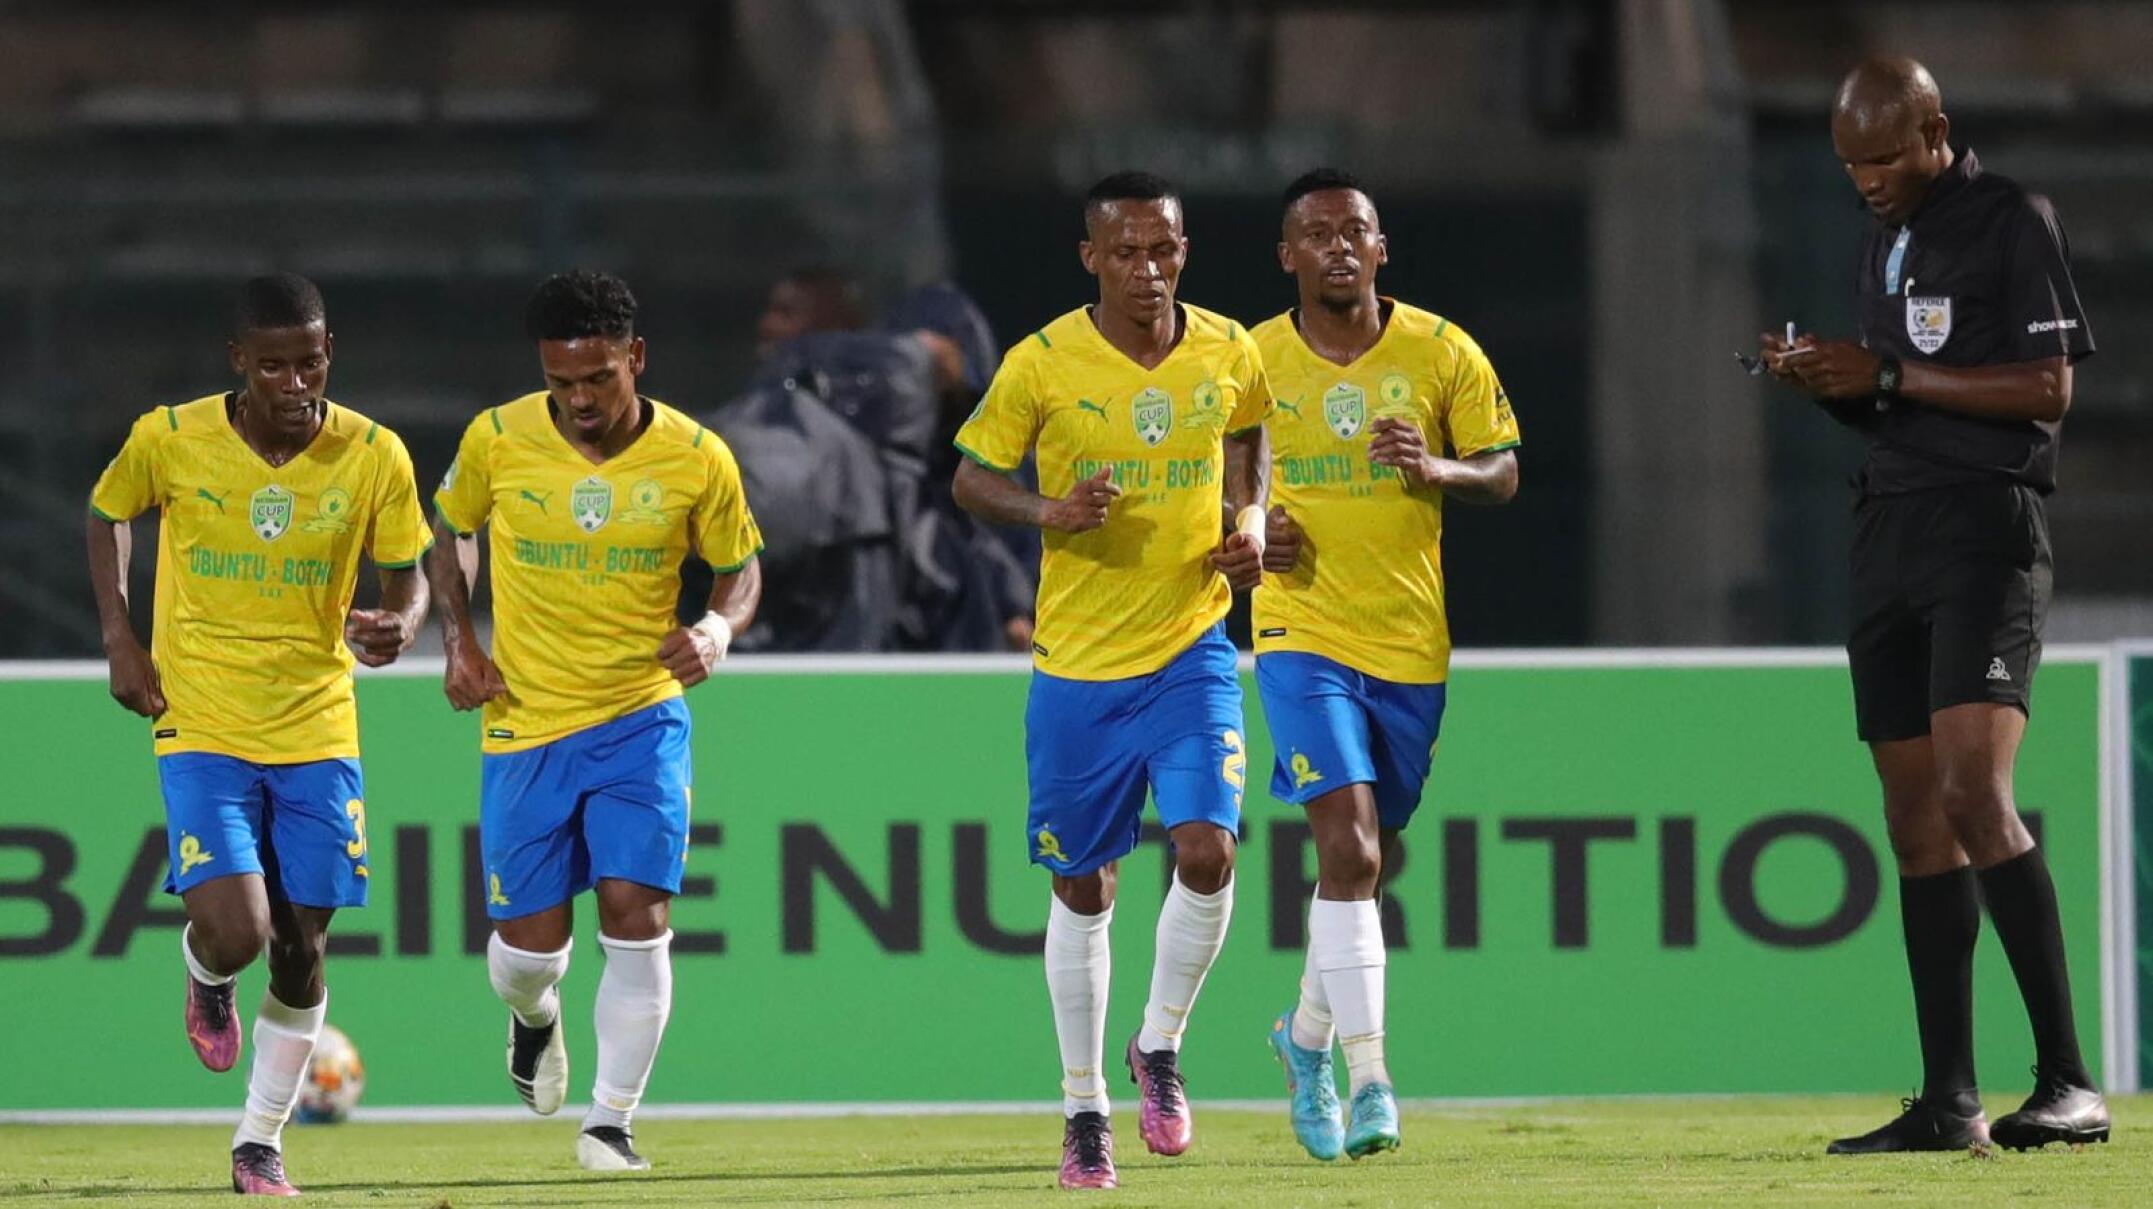 Mamelodi Sundowns’ Thabiso Kutumela celebrates with teammates after scoring during their Nedbank Cup Round of 16 clash against Mathaithai FC at Lucas Moripe Stadium in Atteridgeville on Tuesday